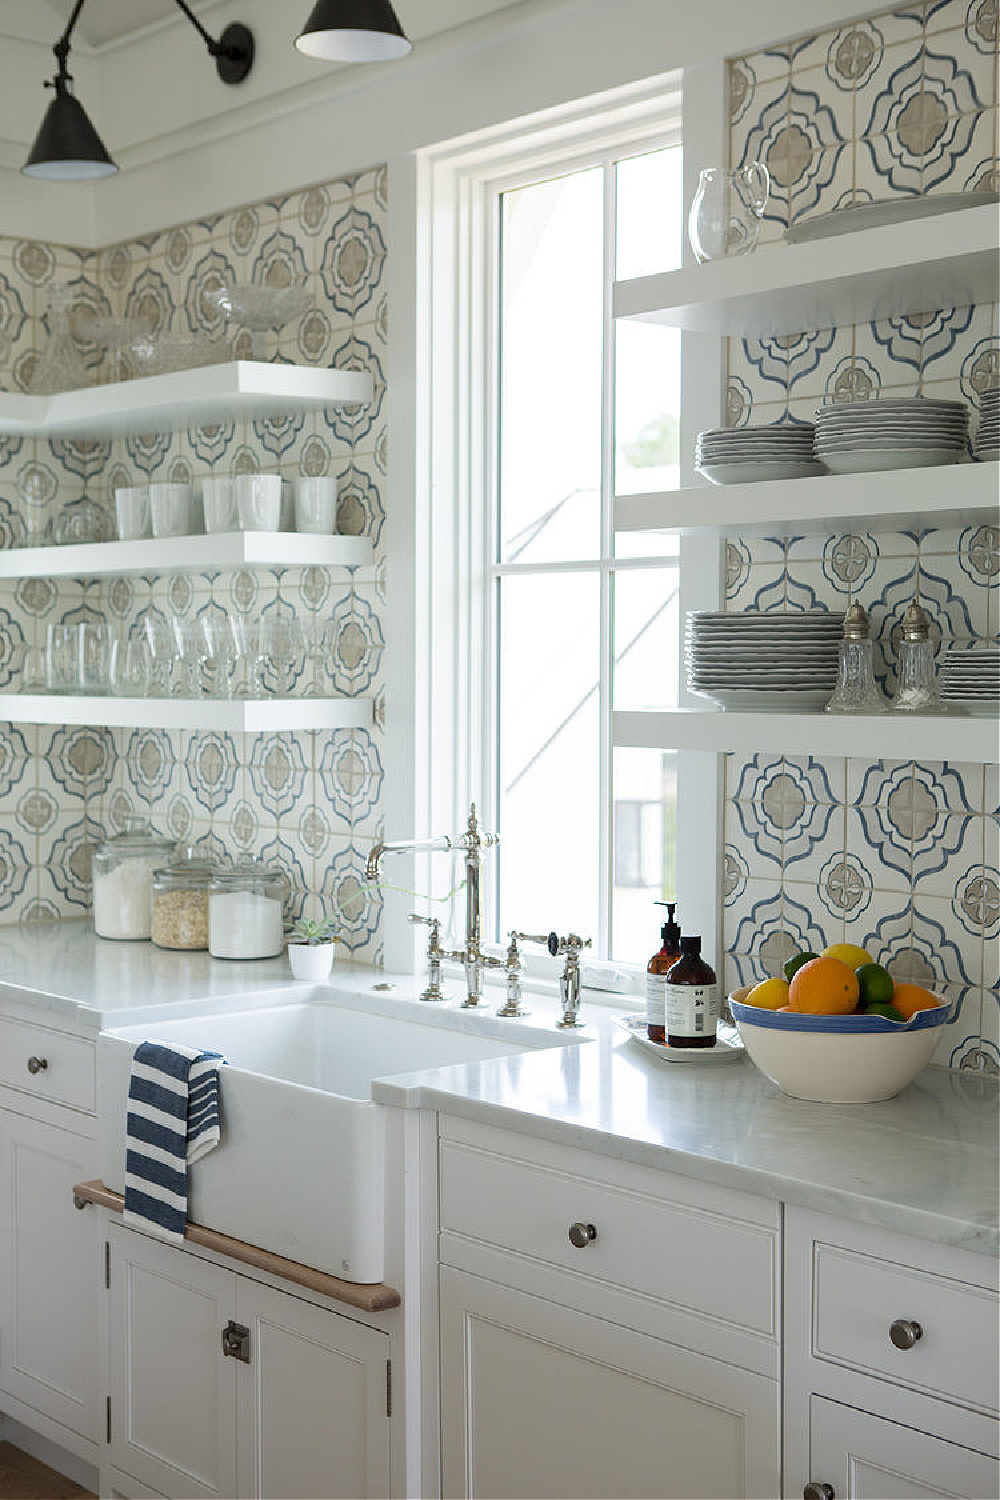 White Shaker kitchen with farm sink and stunning tile backsplash (Duquesa Jasmine in Mezzanotte by Walker Zanger). Resources and details ahead!